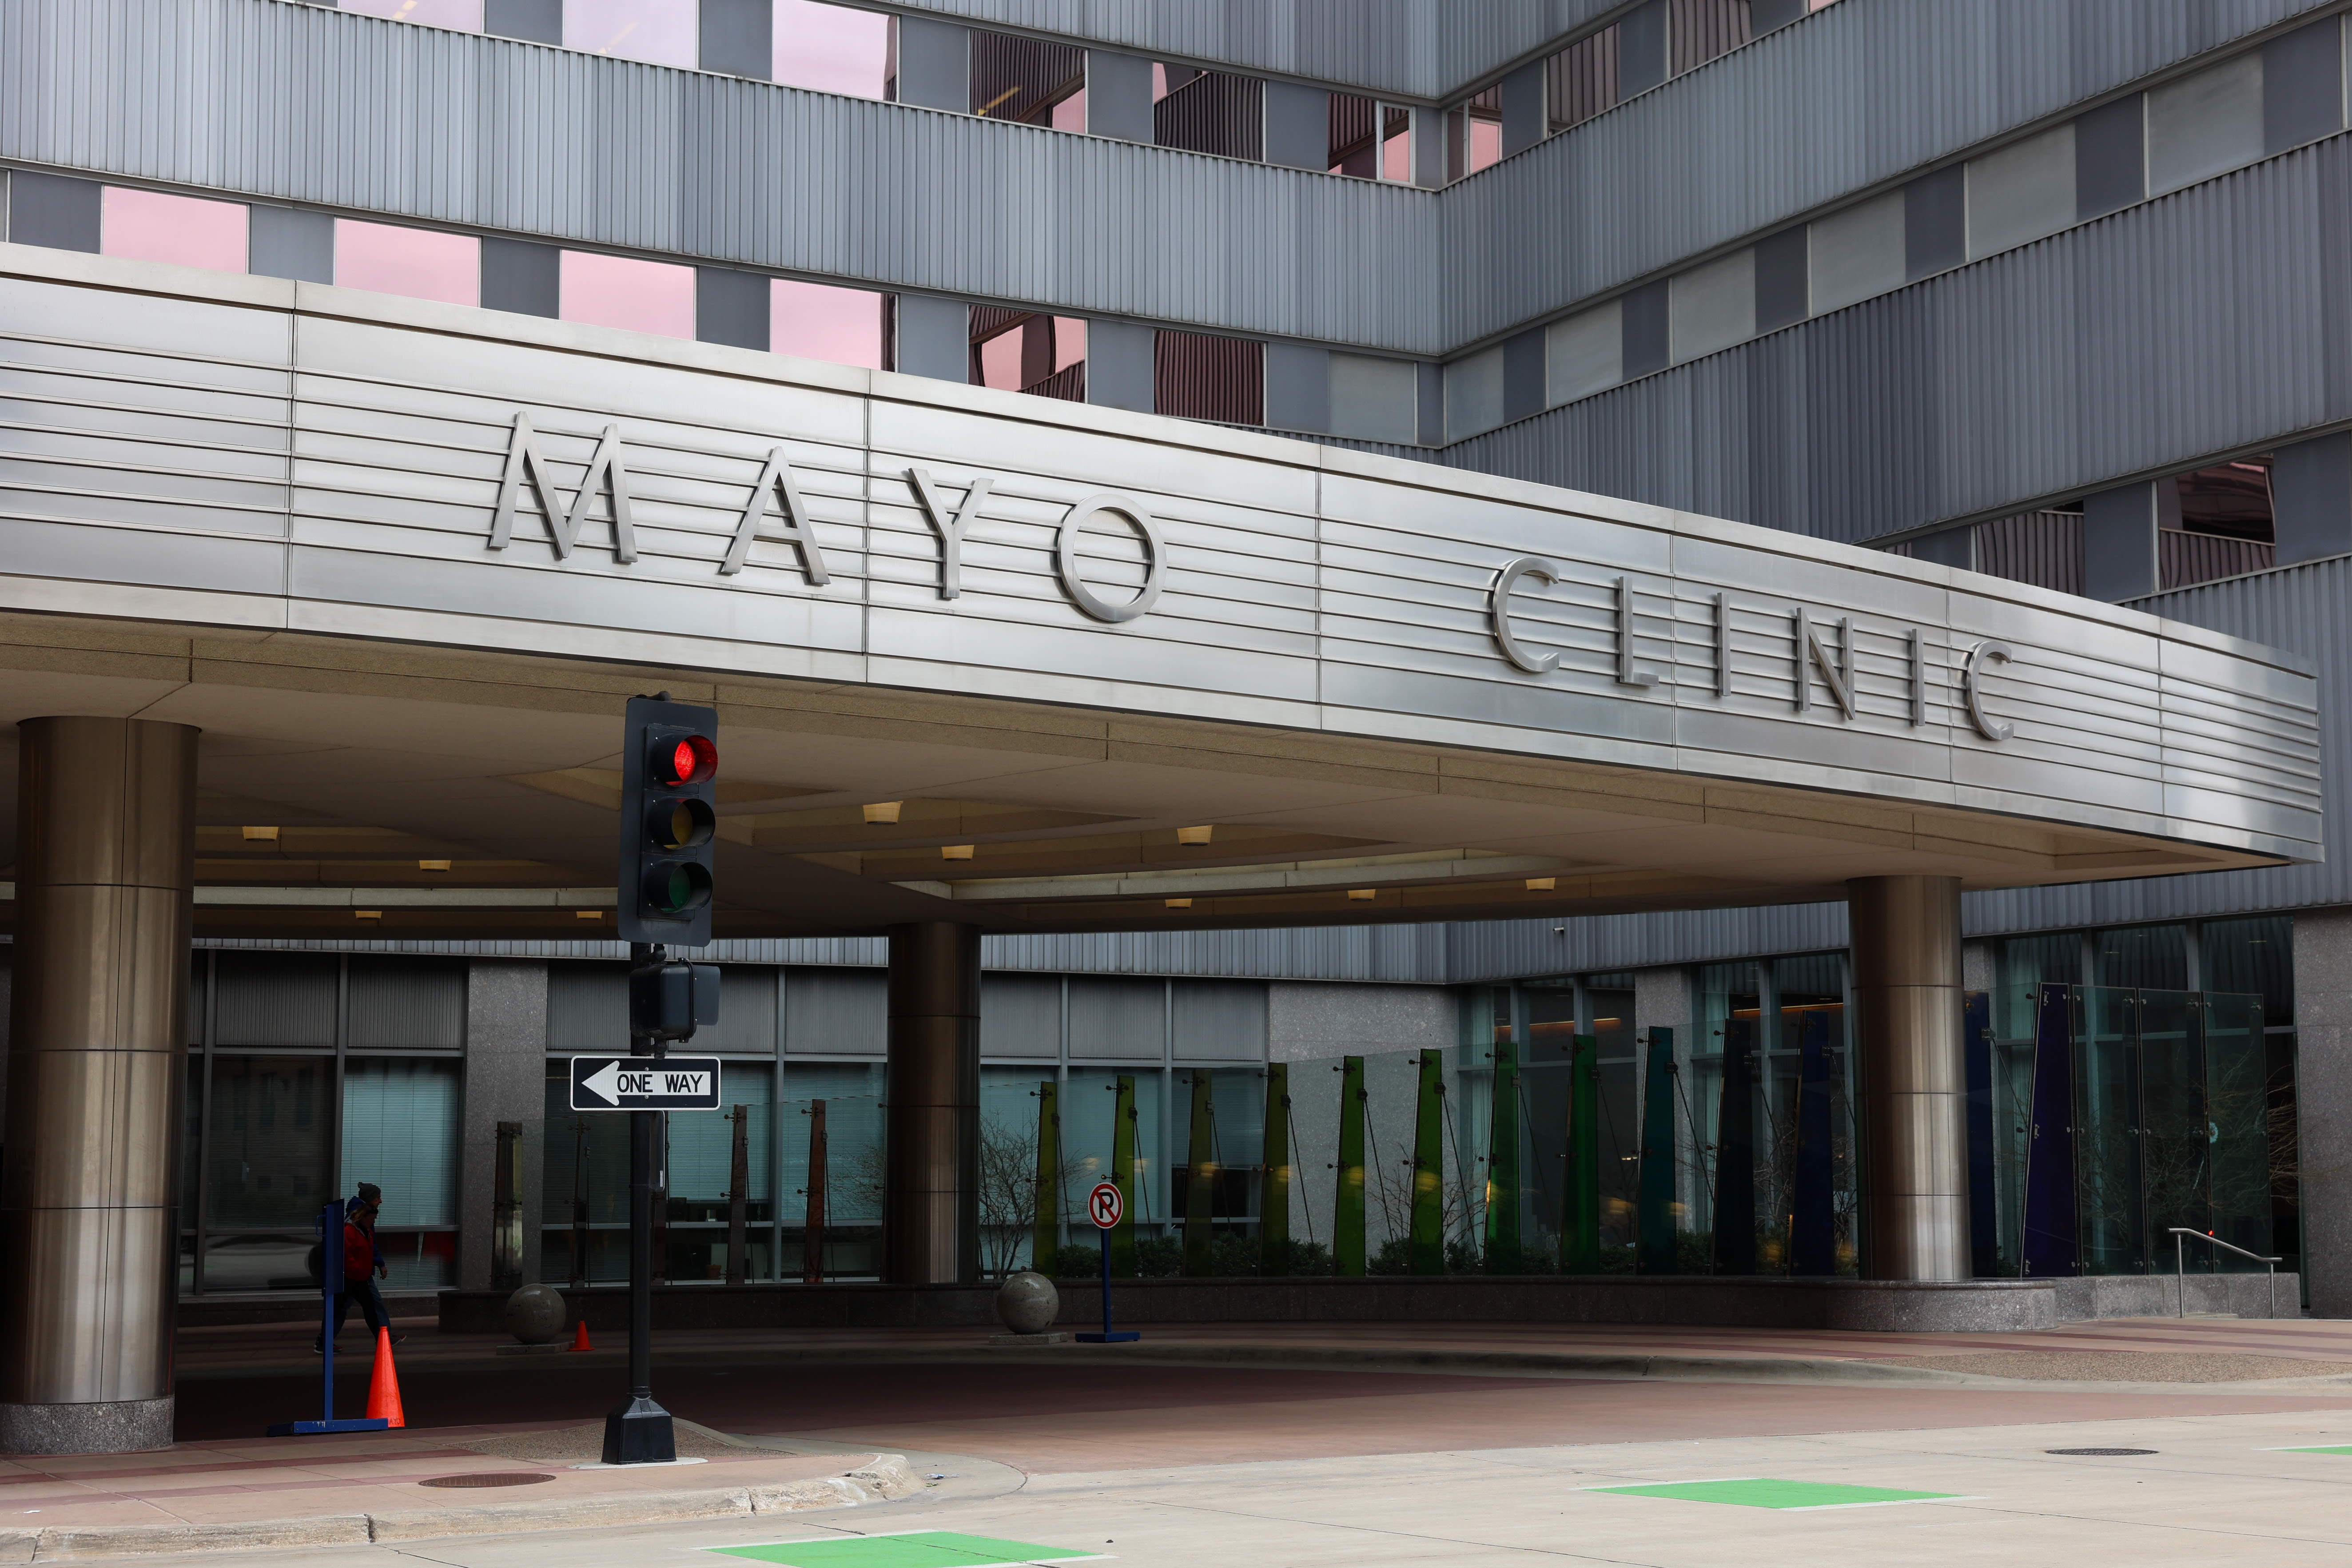 Good early returns for Mayo Clinic: Income up 143% so far this year